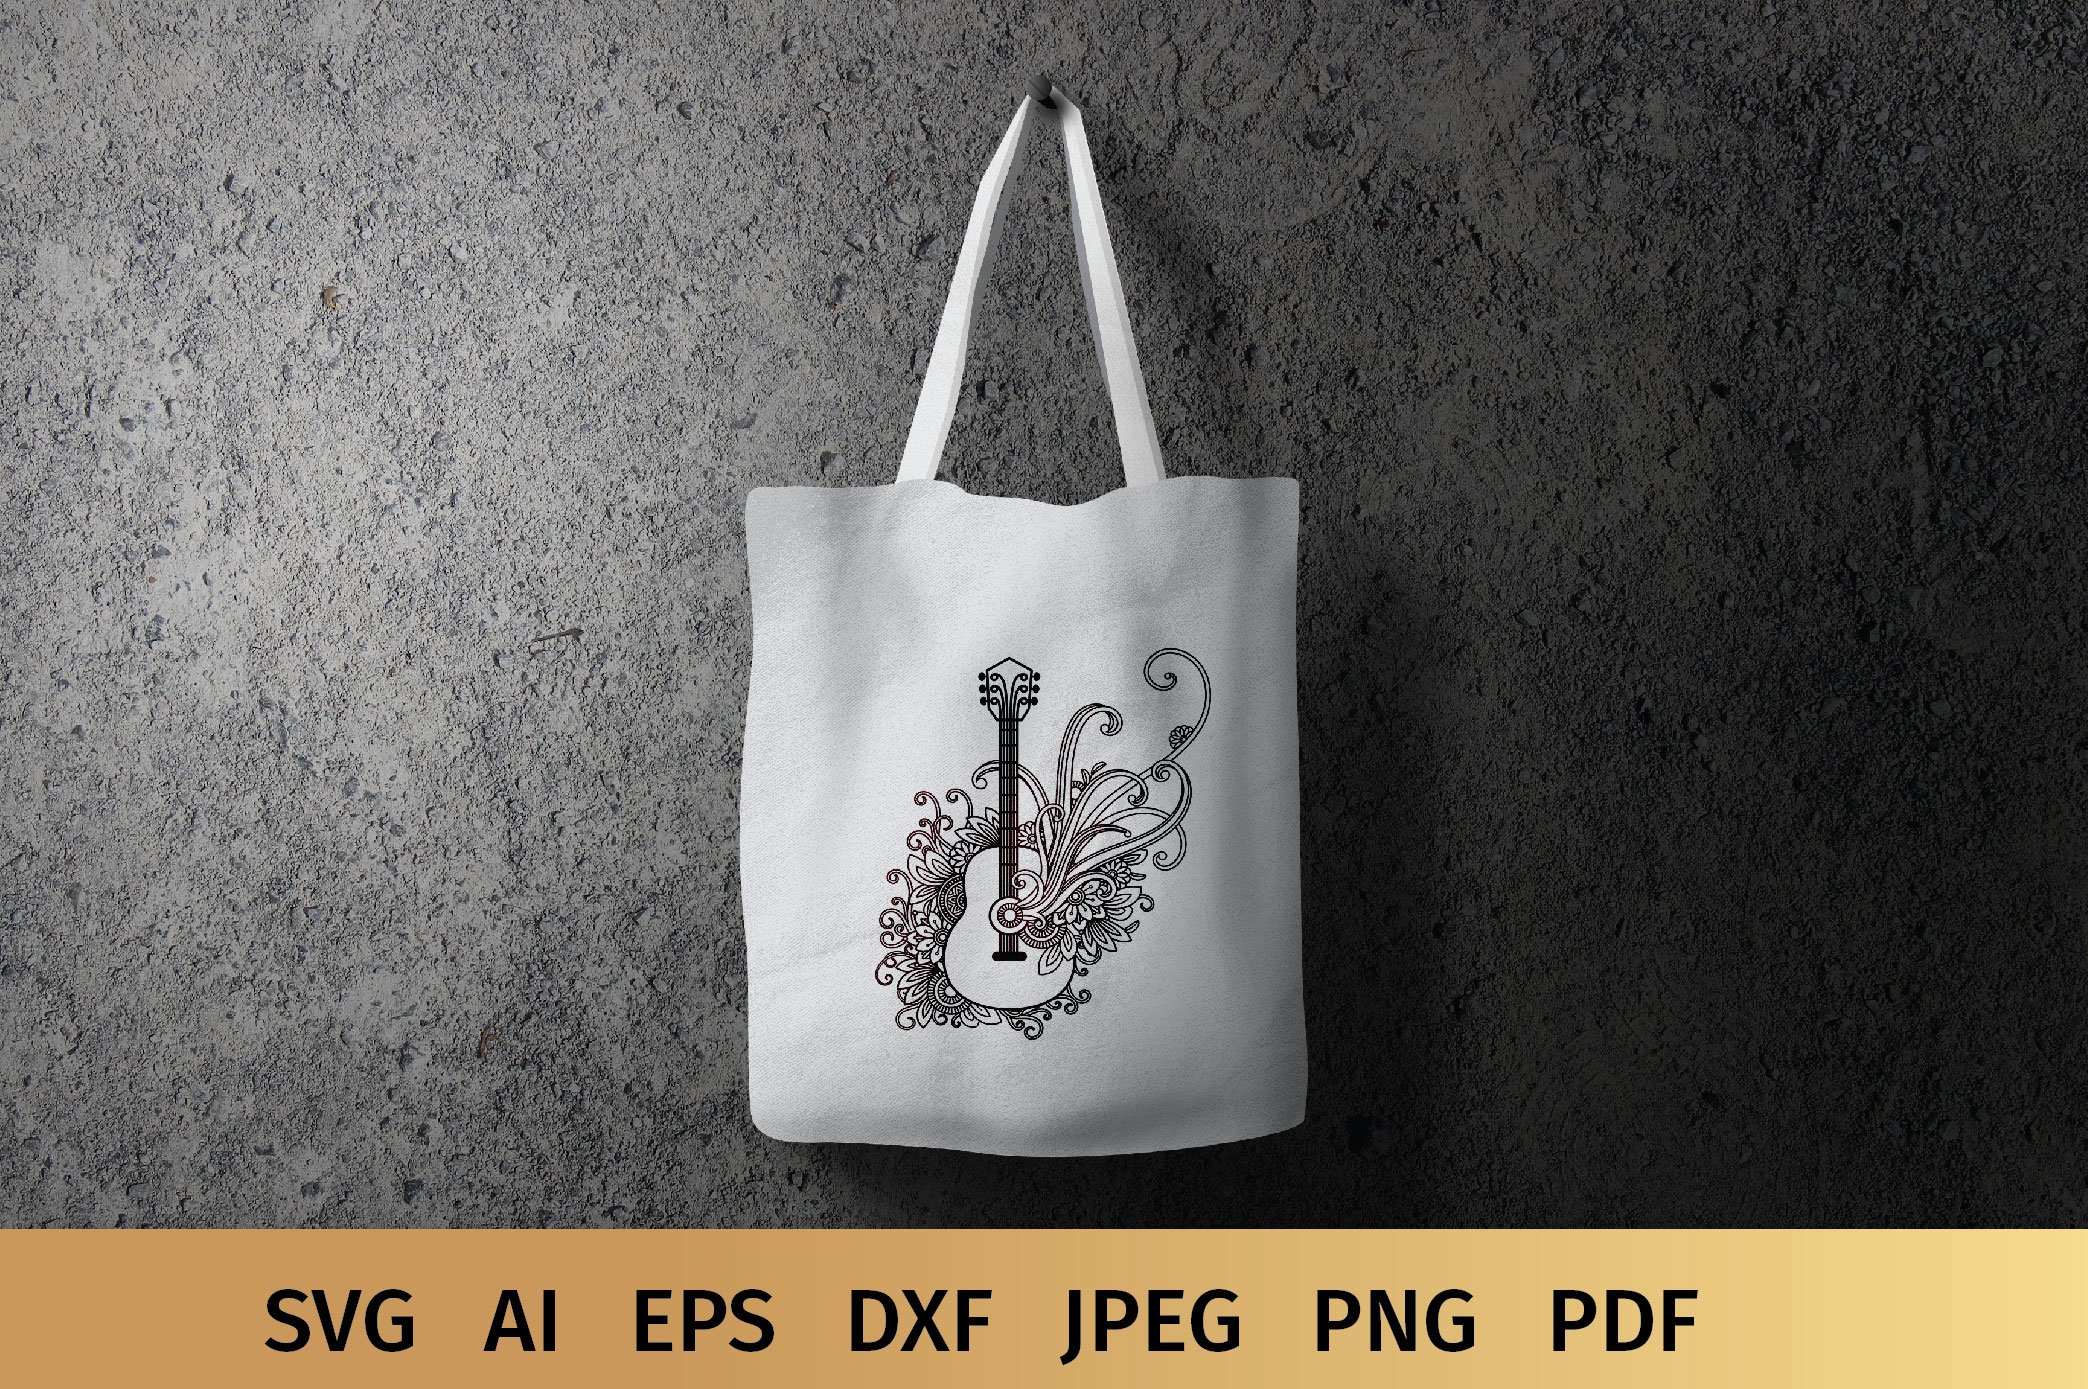 A wonderful white bag on a dark background with a guitar print.